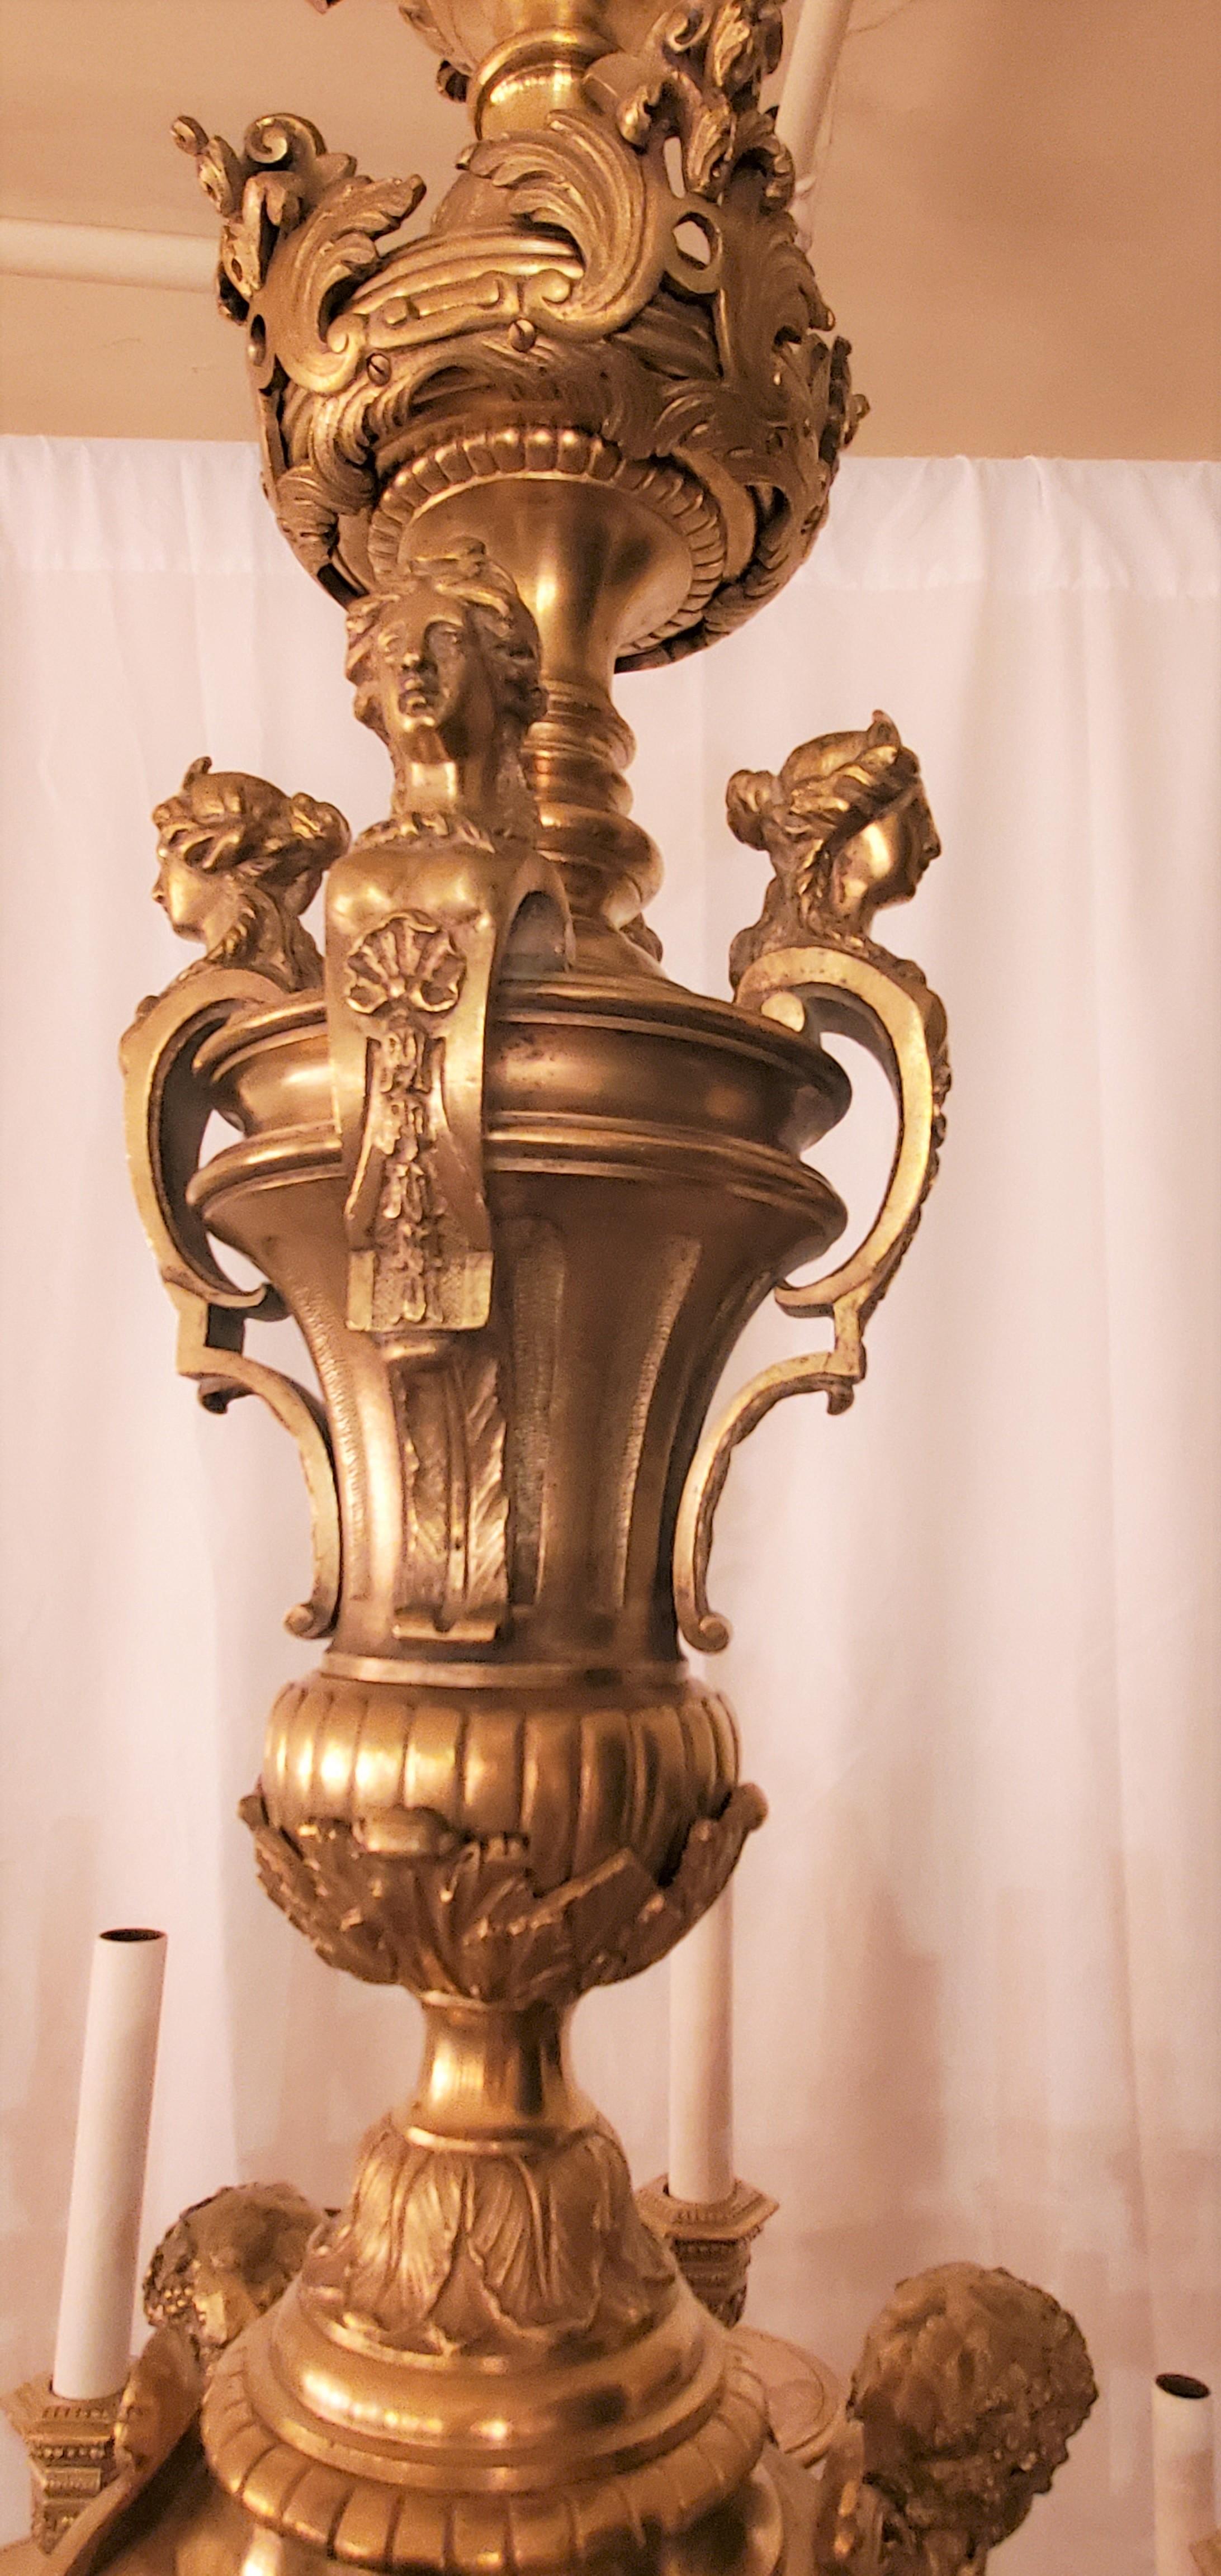 A very handsome example of a Mazarin fixture.